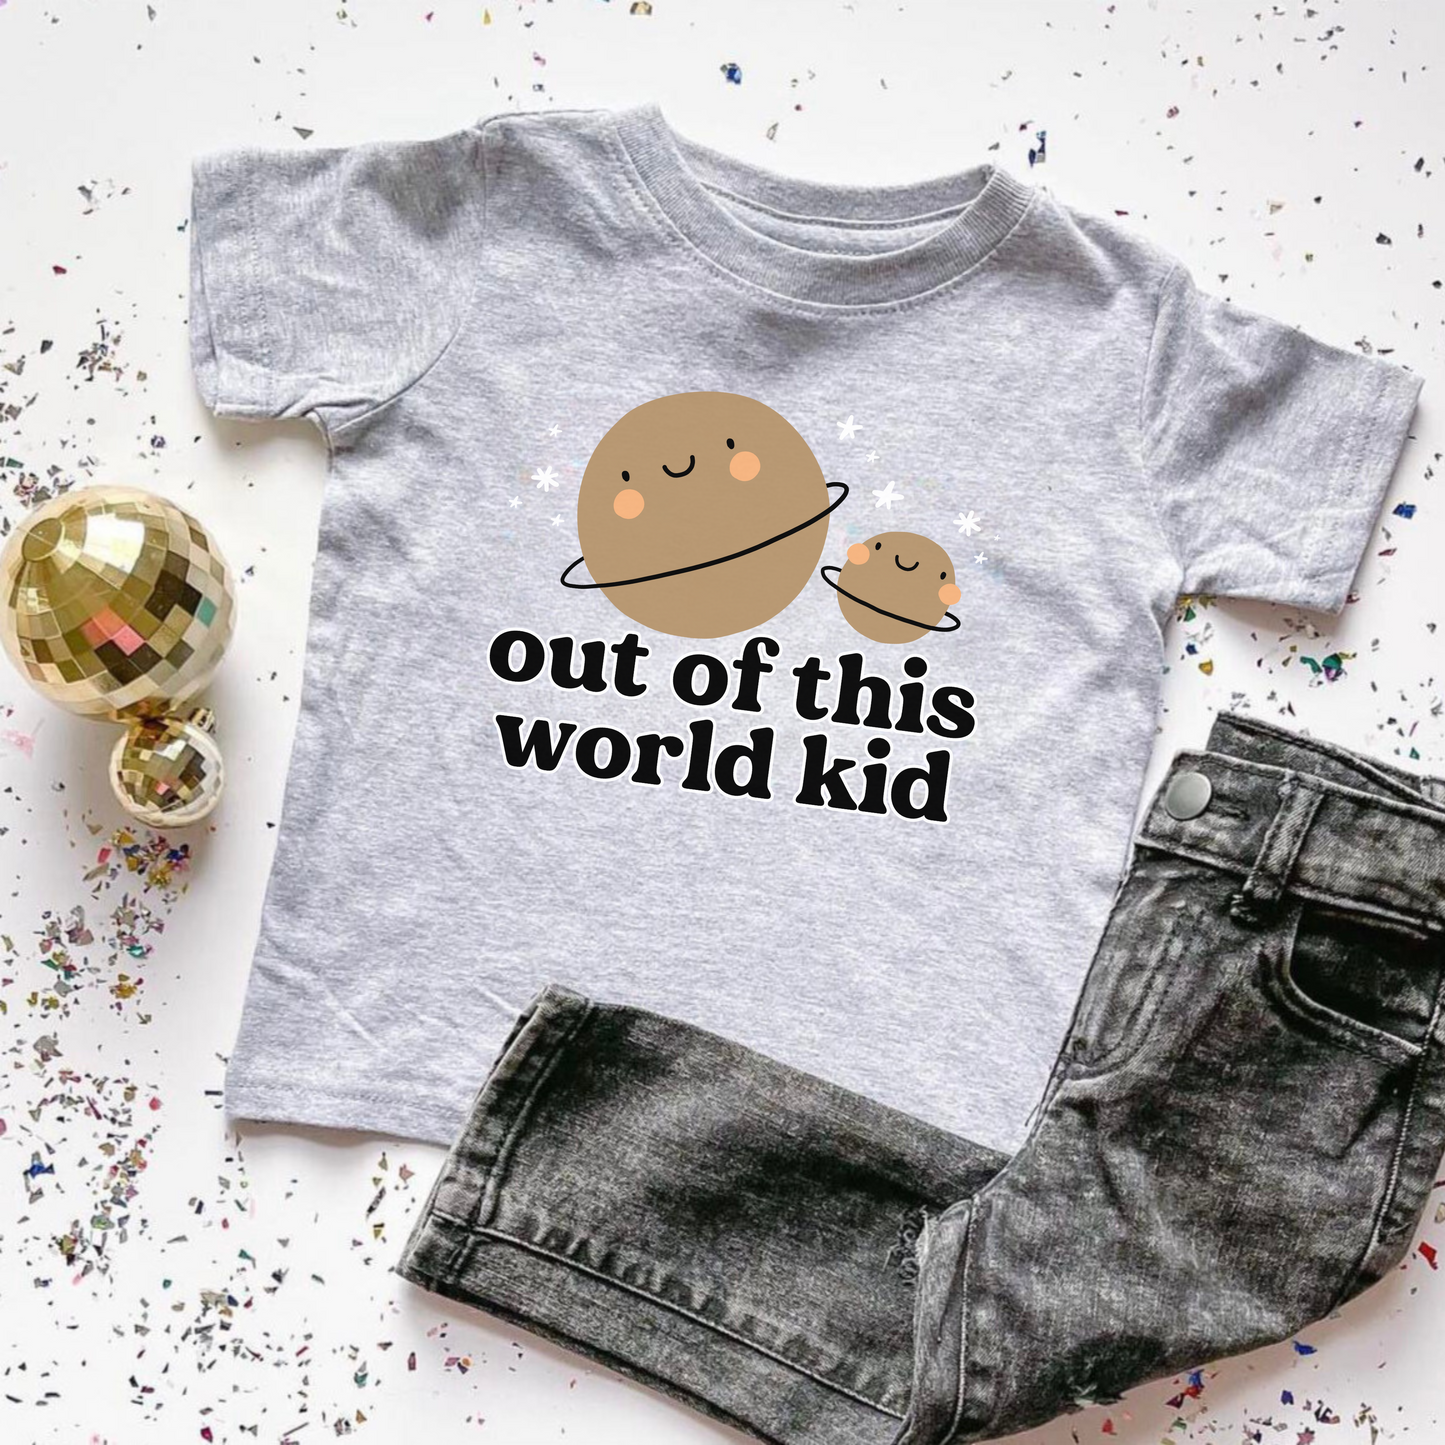 out of this world kid